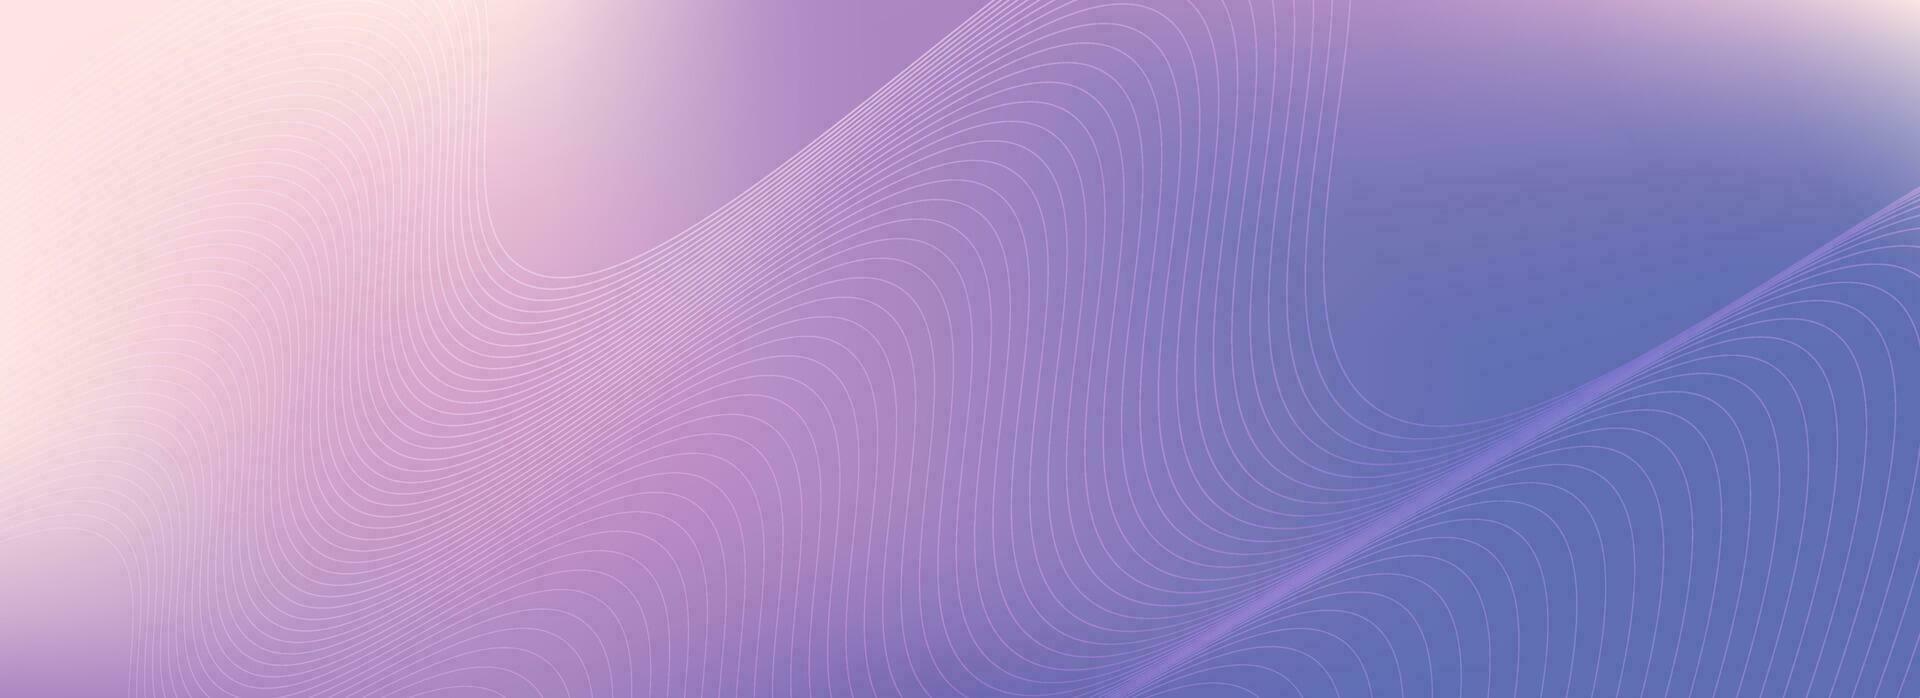 Pastel gradient background with blended lines. vector